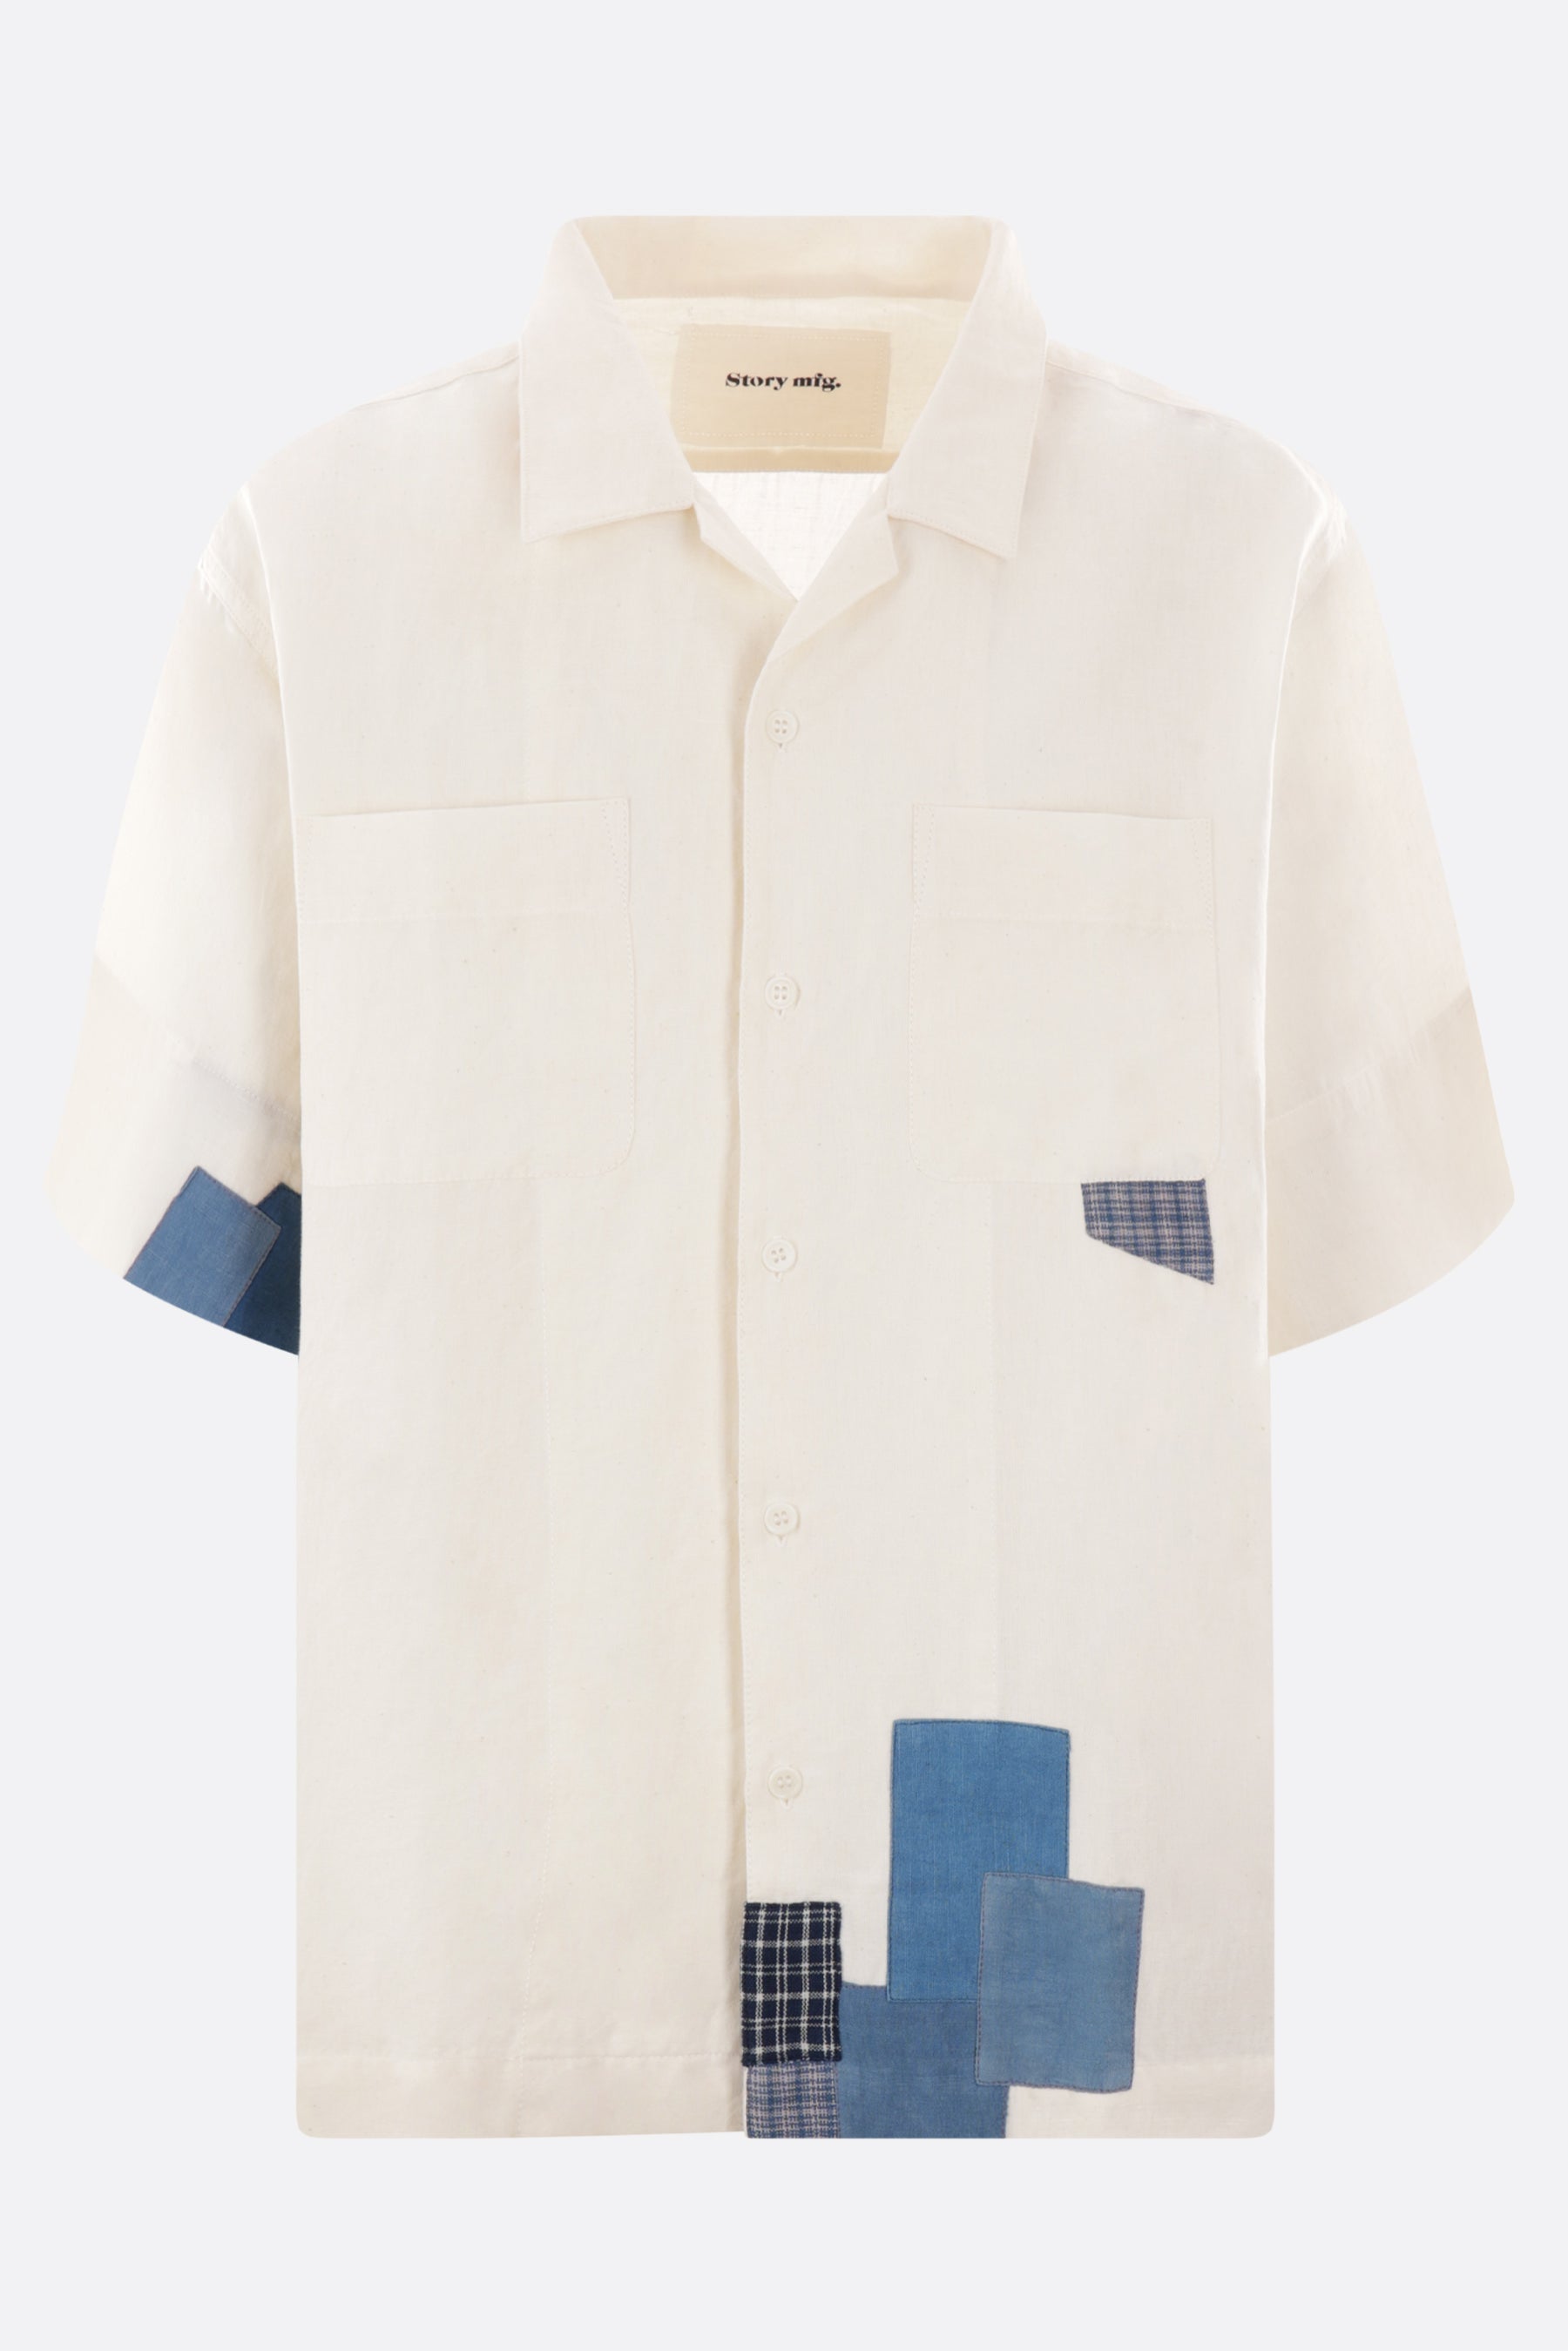 PA oversized short-sleeved shirt in cotton and linen